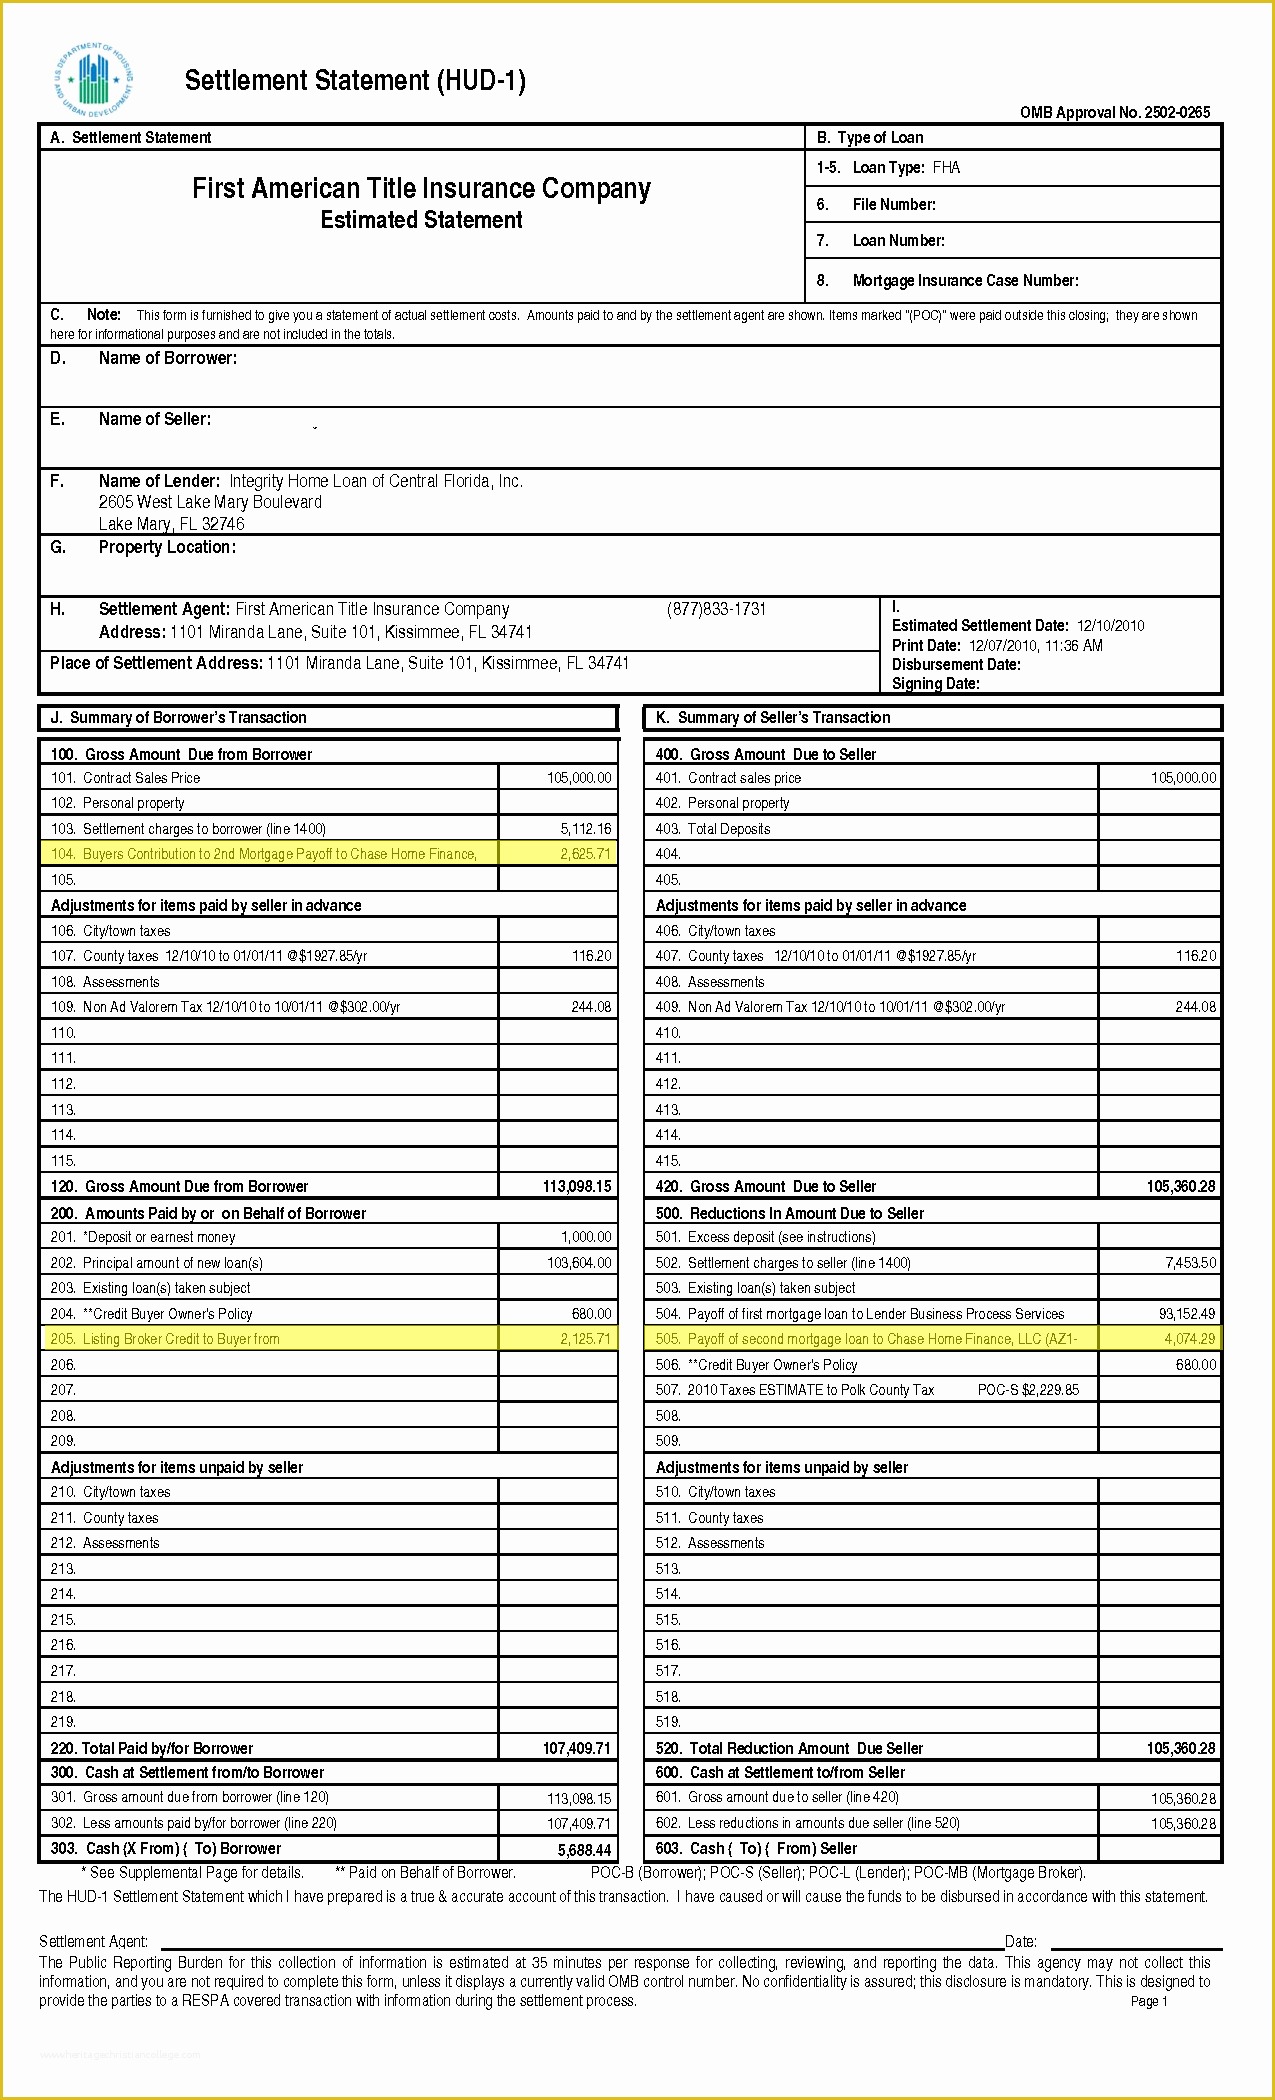 Free Settlement Statement Template Of Hud1 Settlement Statement Best Template Collection